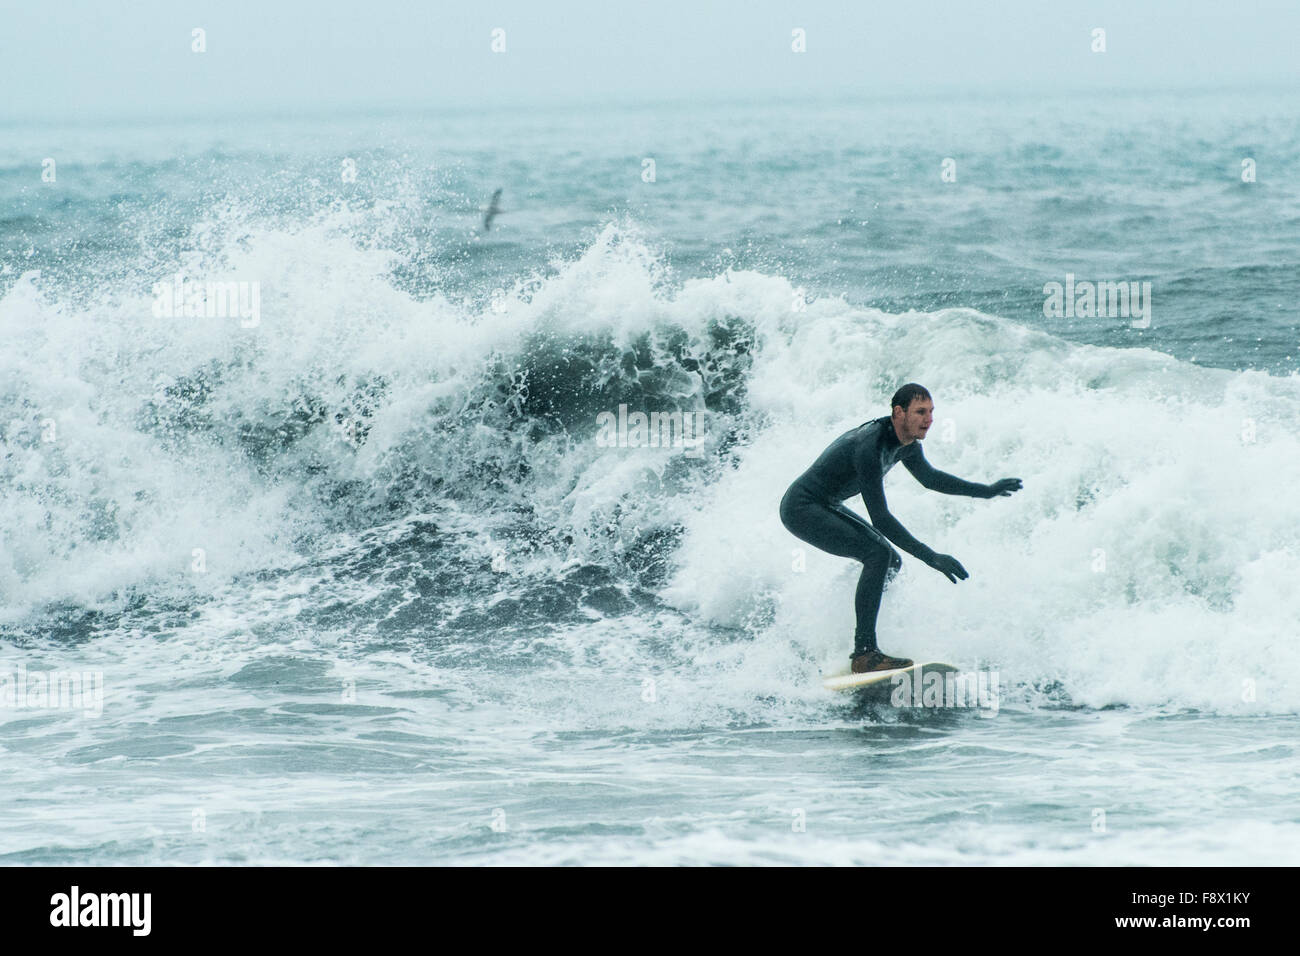 Outside of Vik. Man surfing waves at black sand beach. Stock Photo